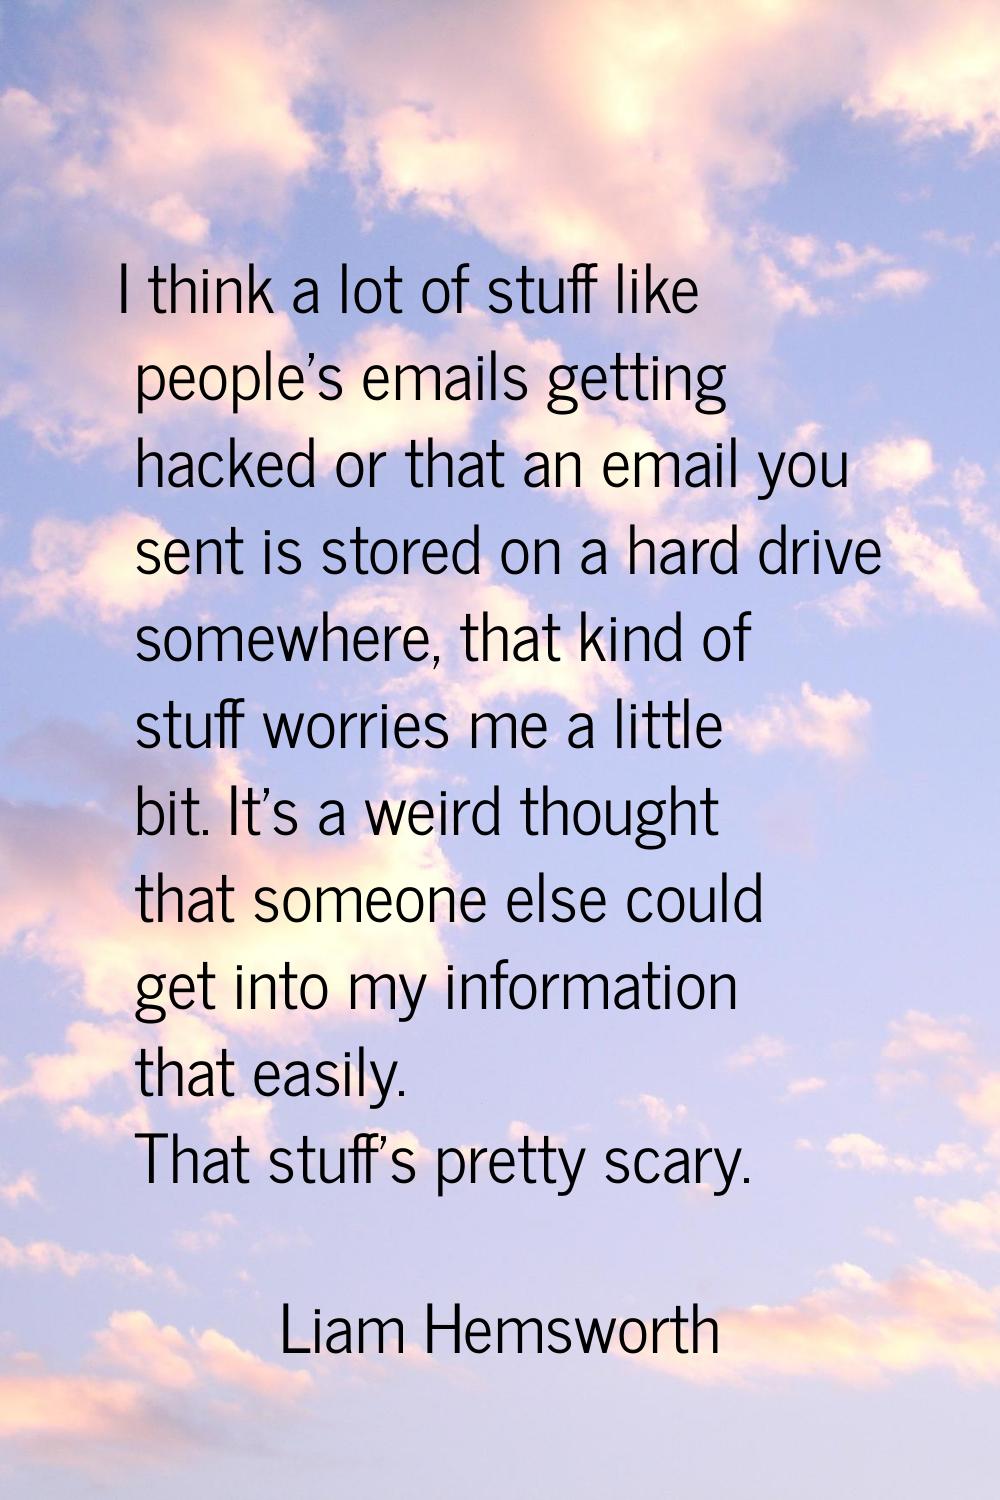 I think a lot of stuff like people's emails getting hacked or that an email you sent is stored on a